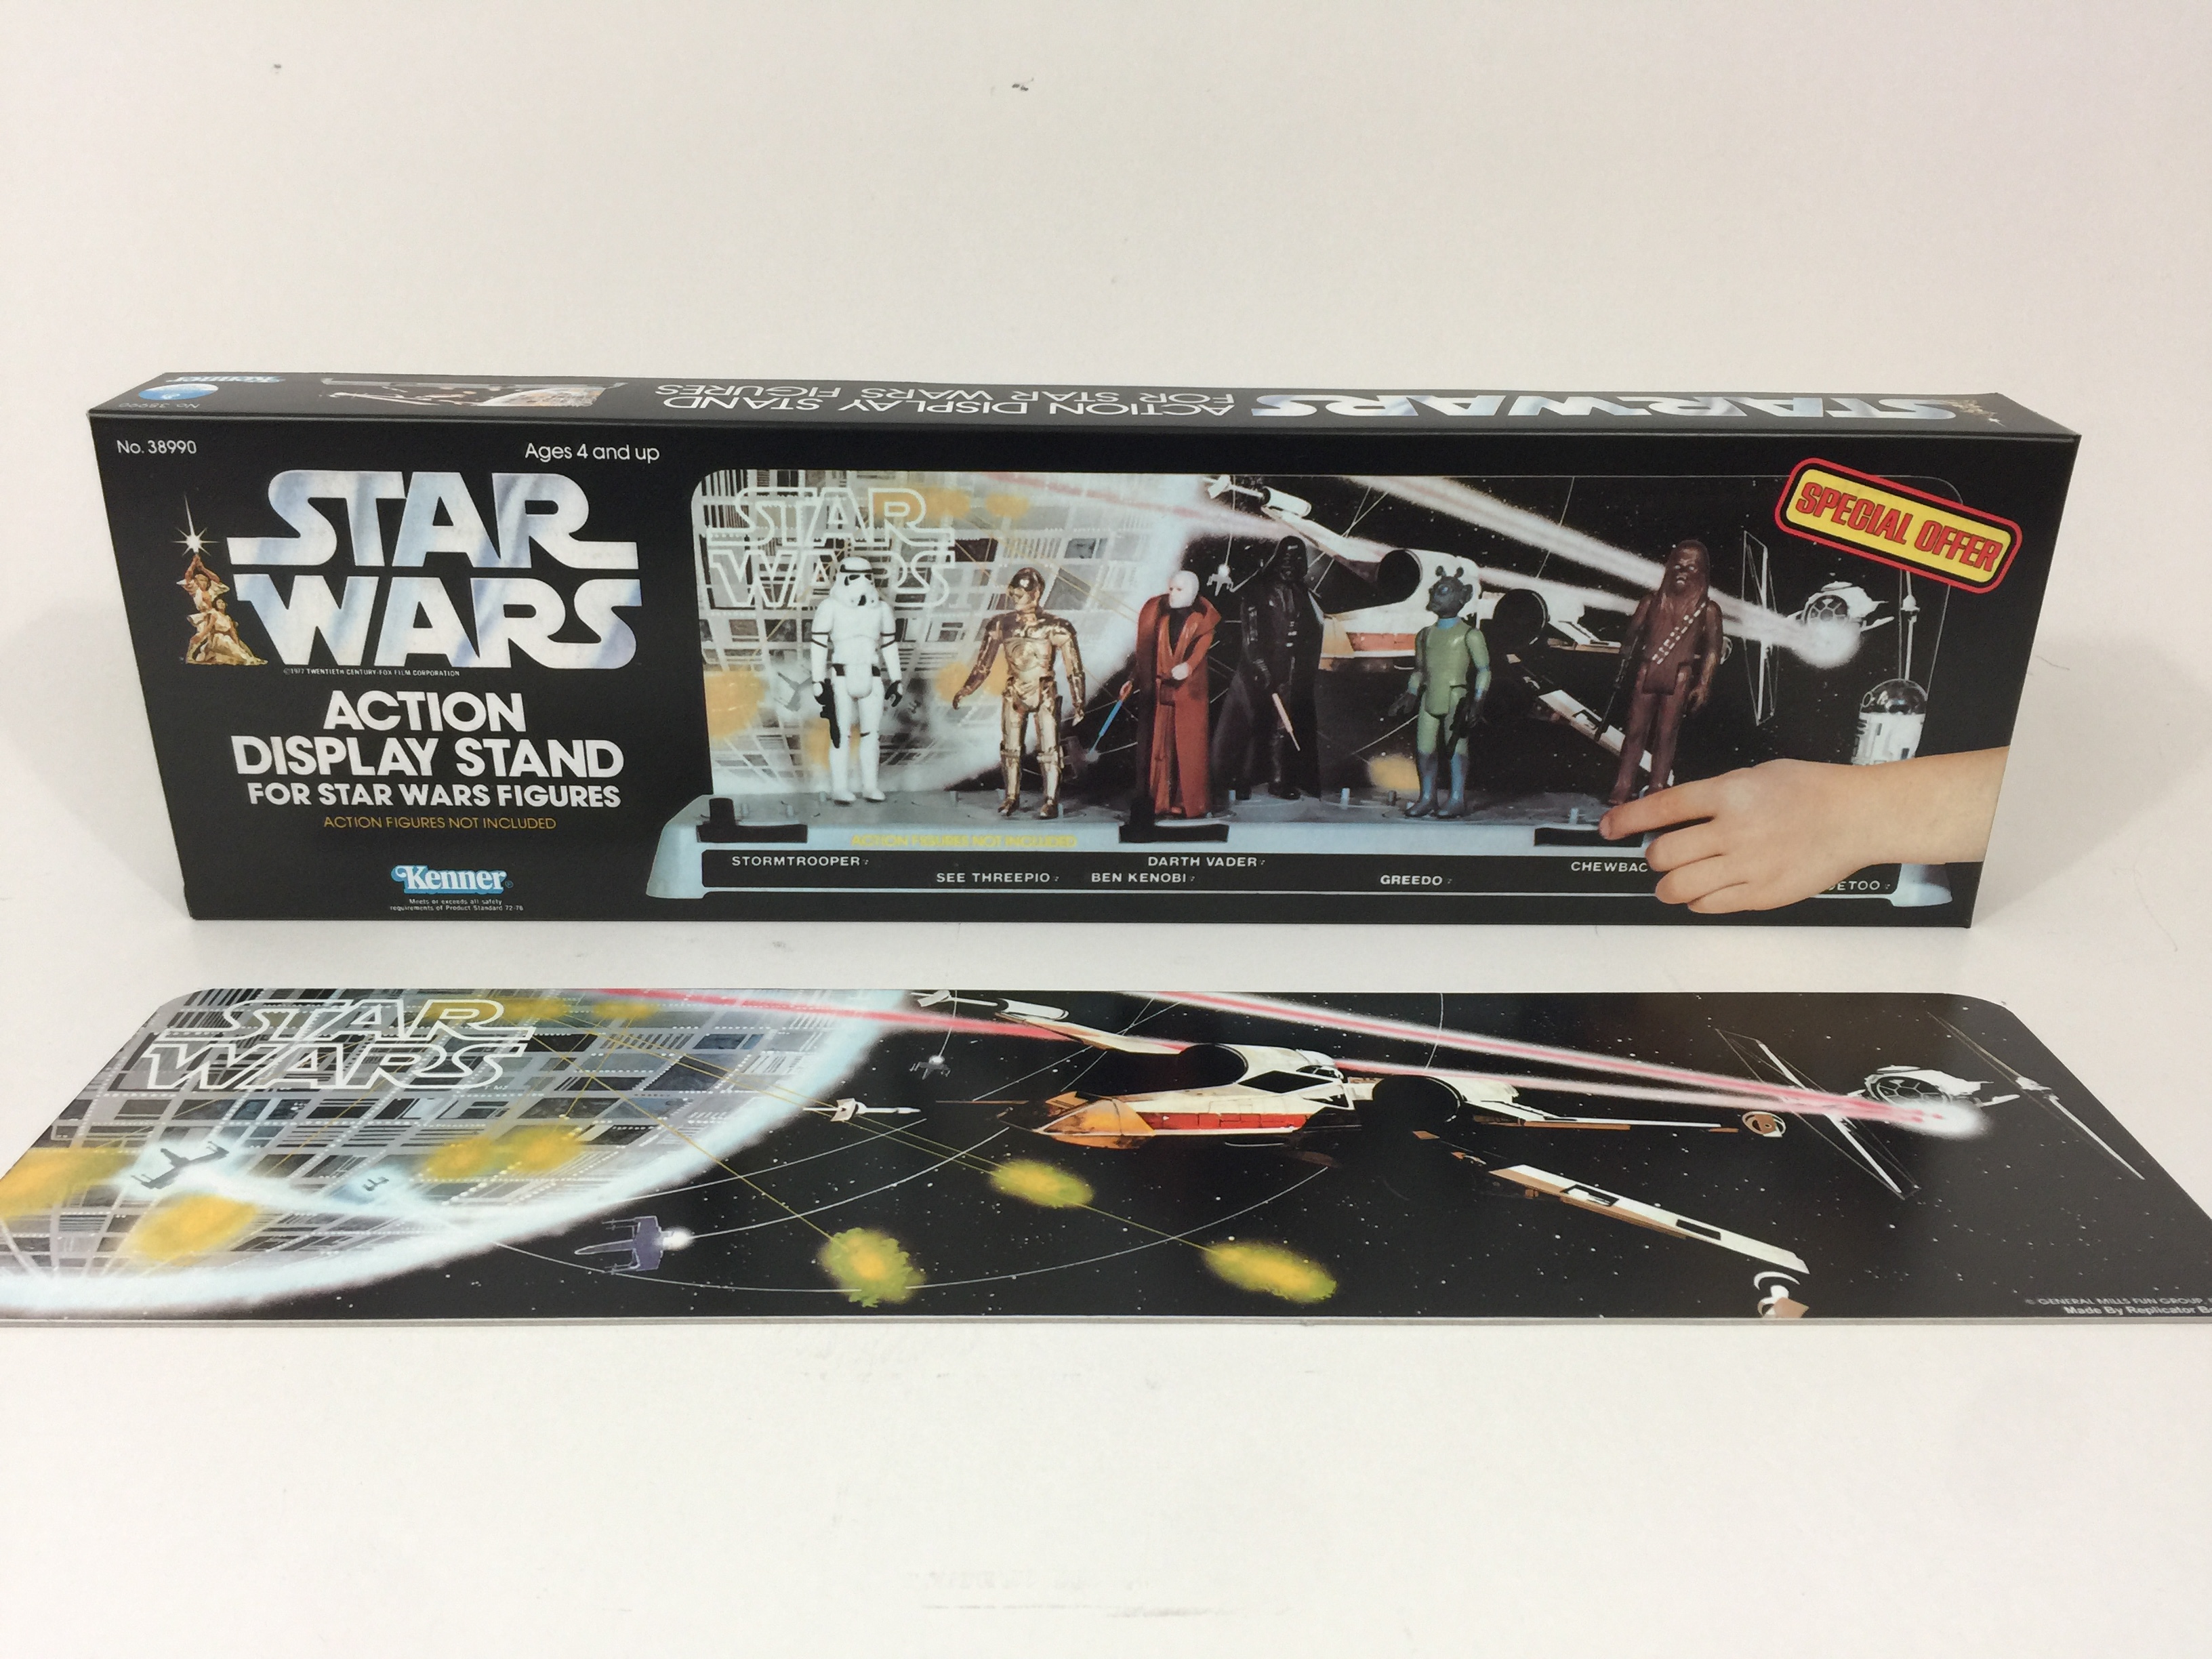  x50 Brand New Pro Display Stands for Vintage Star Wars 1977-1985 Action Figures